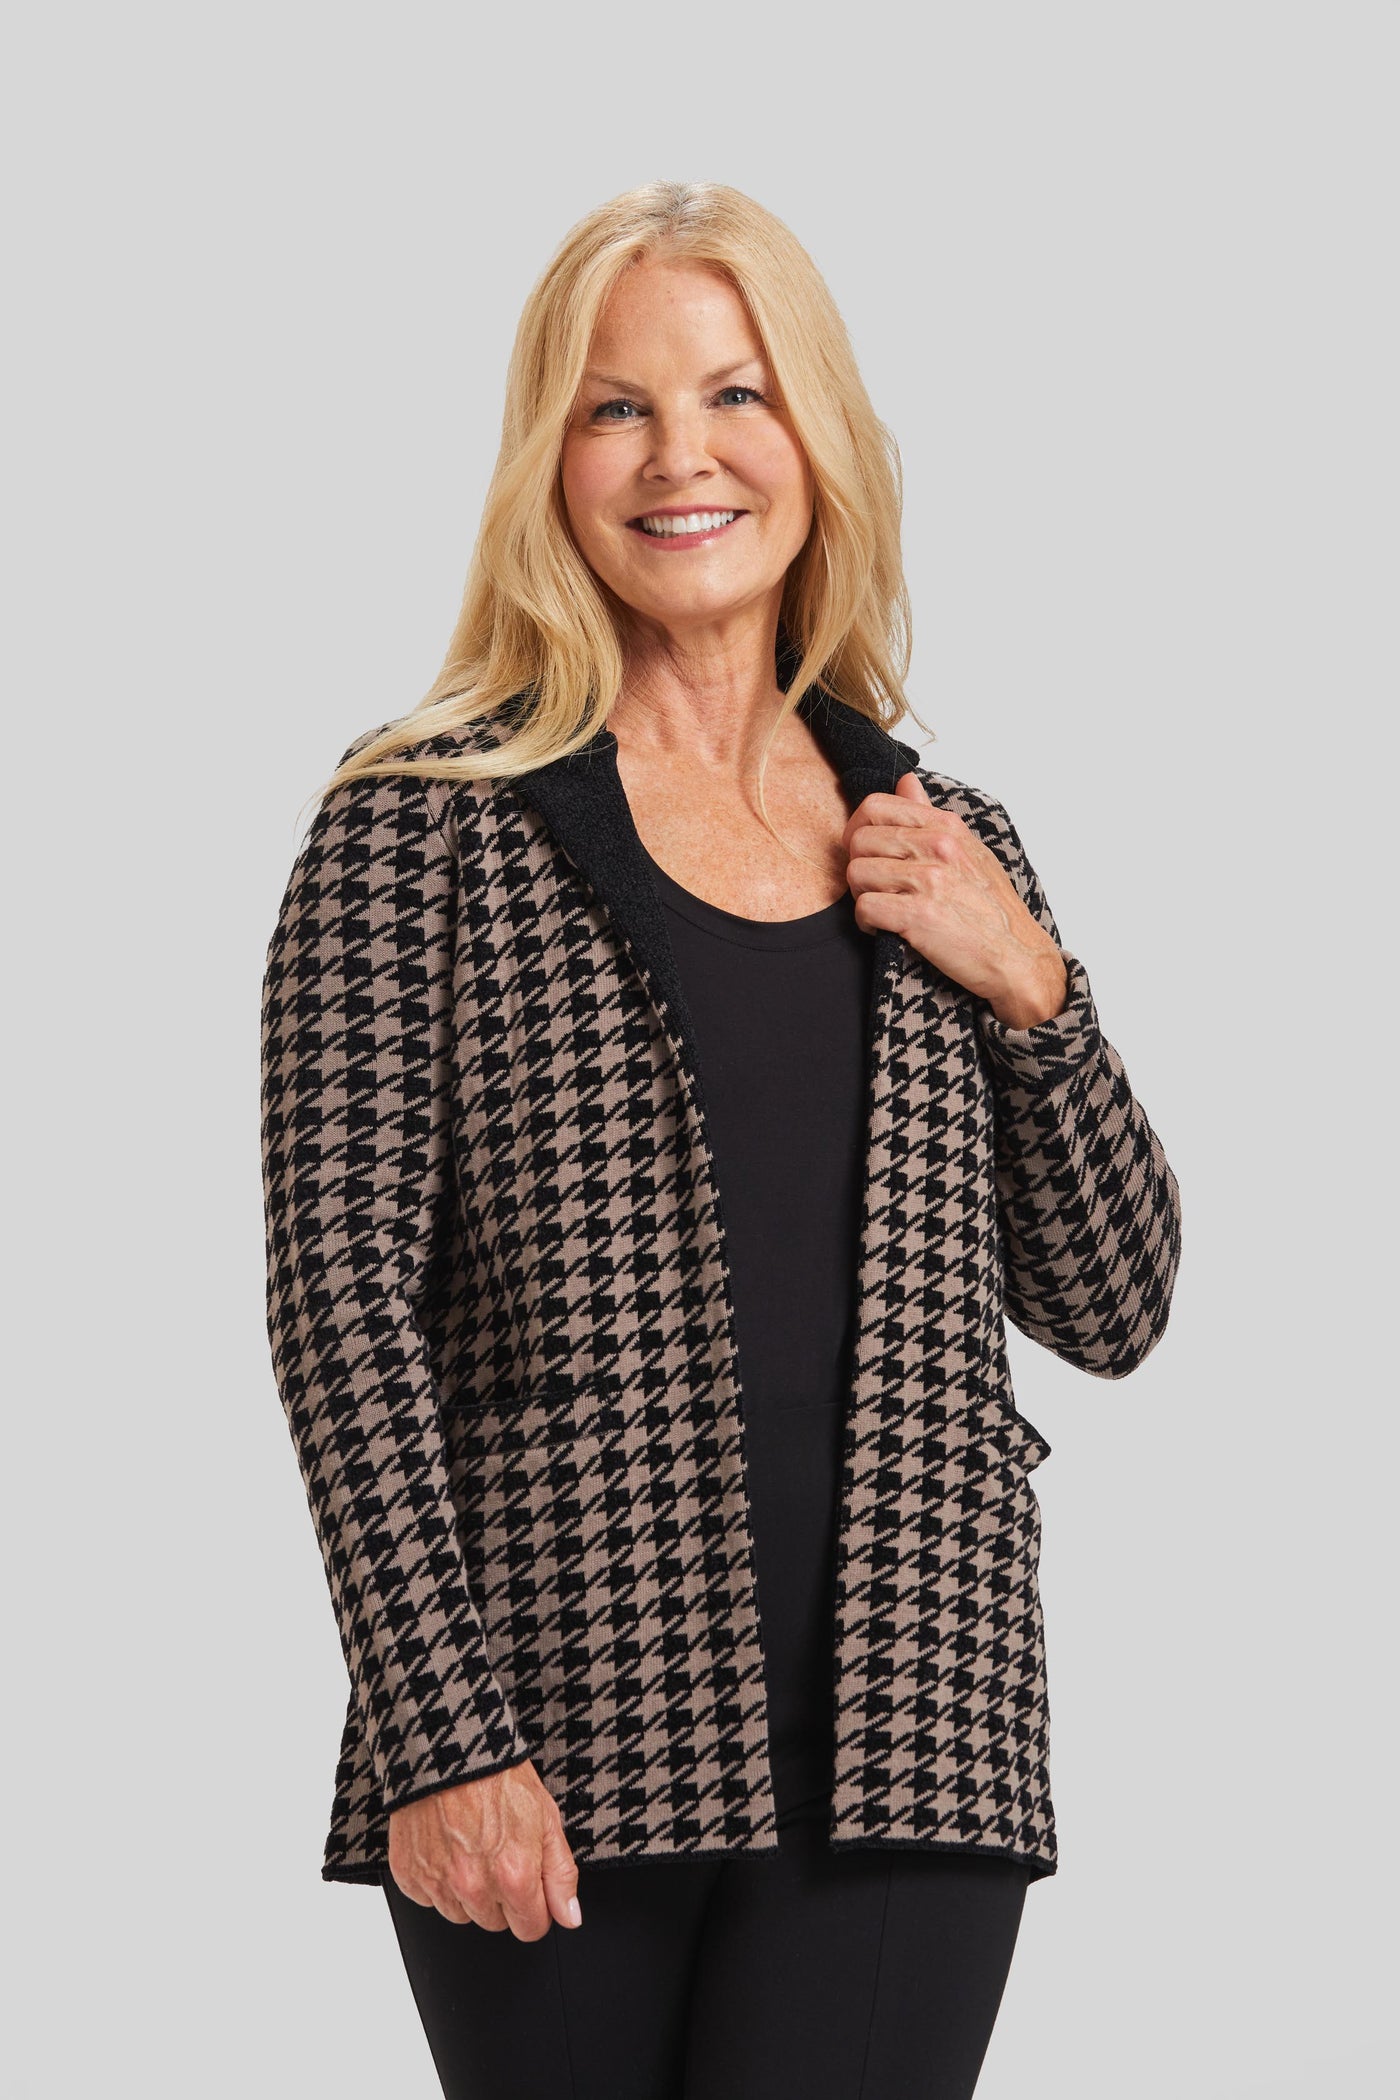 Chenille Houndstooth Jacket